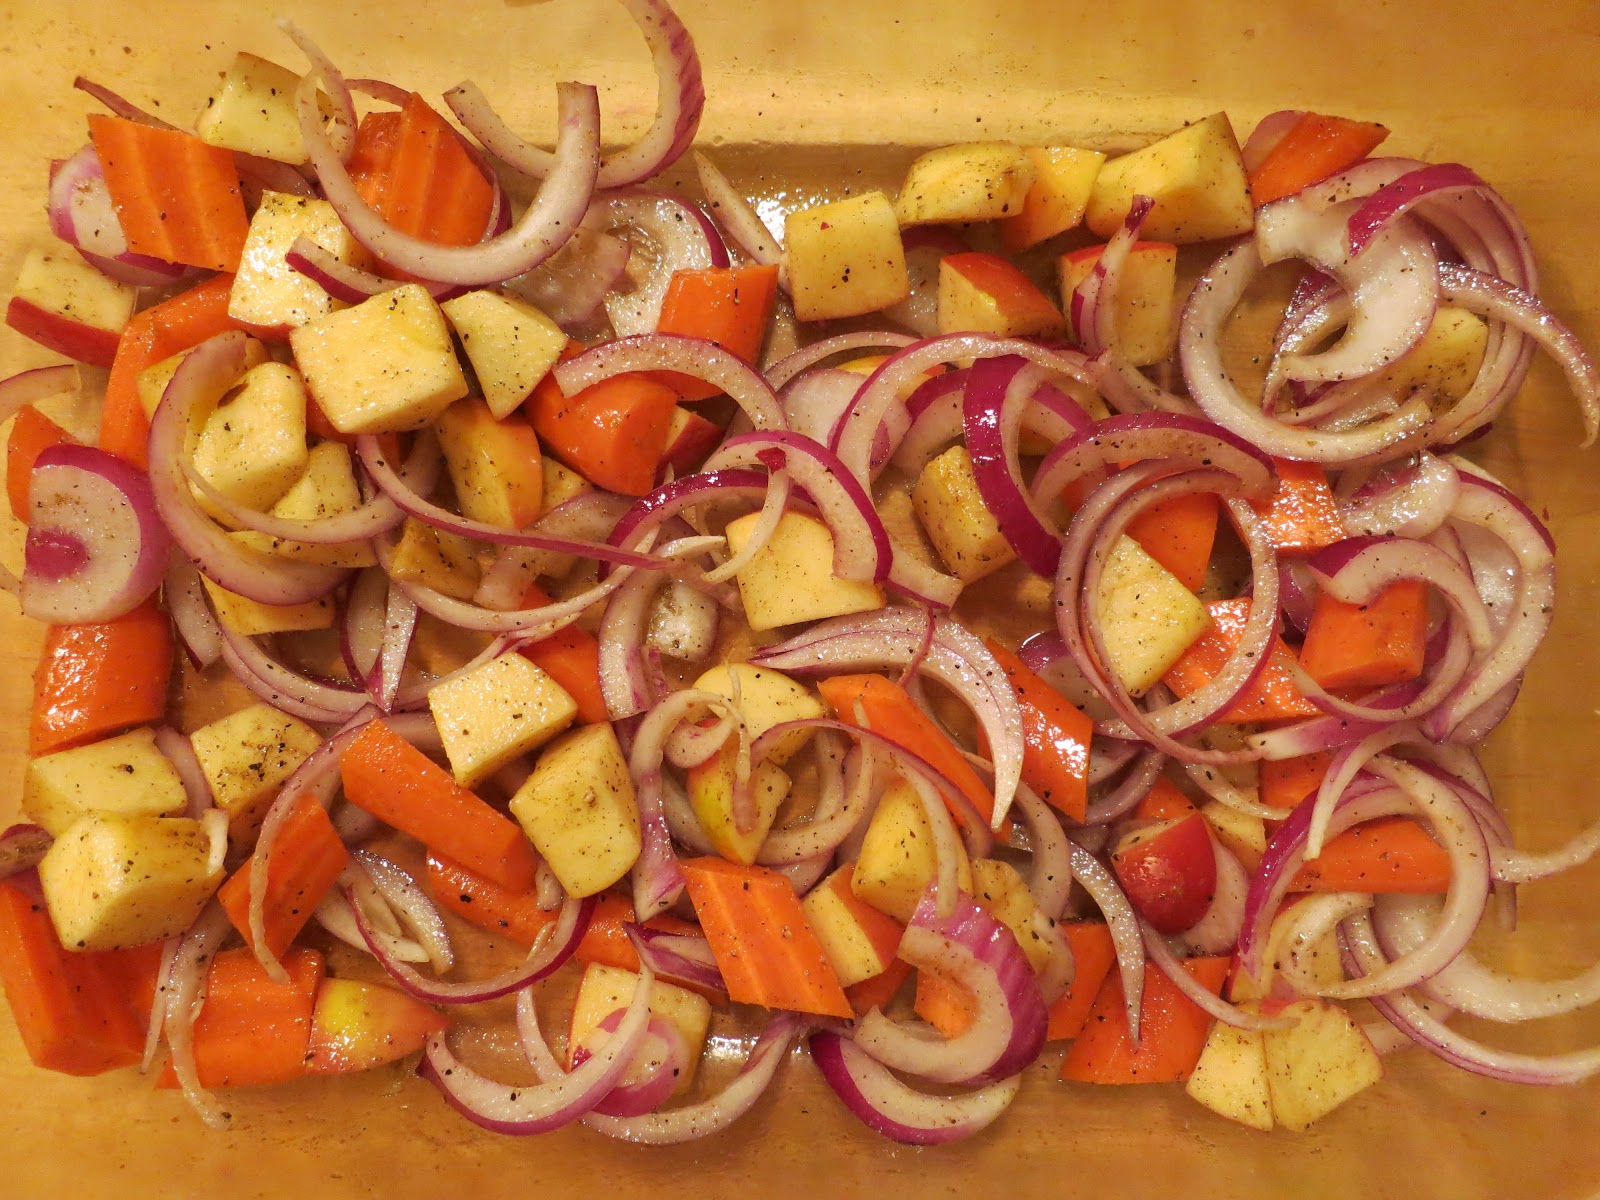 A tray of sliced carrots, onions, and potatoes.